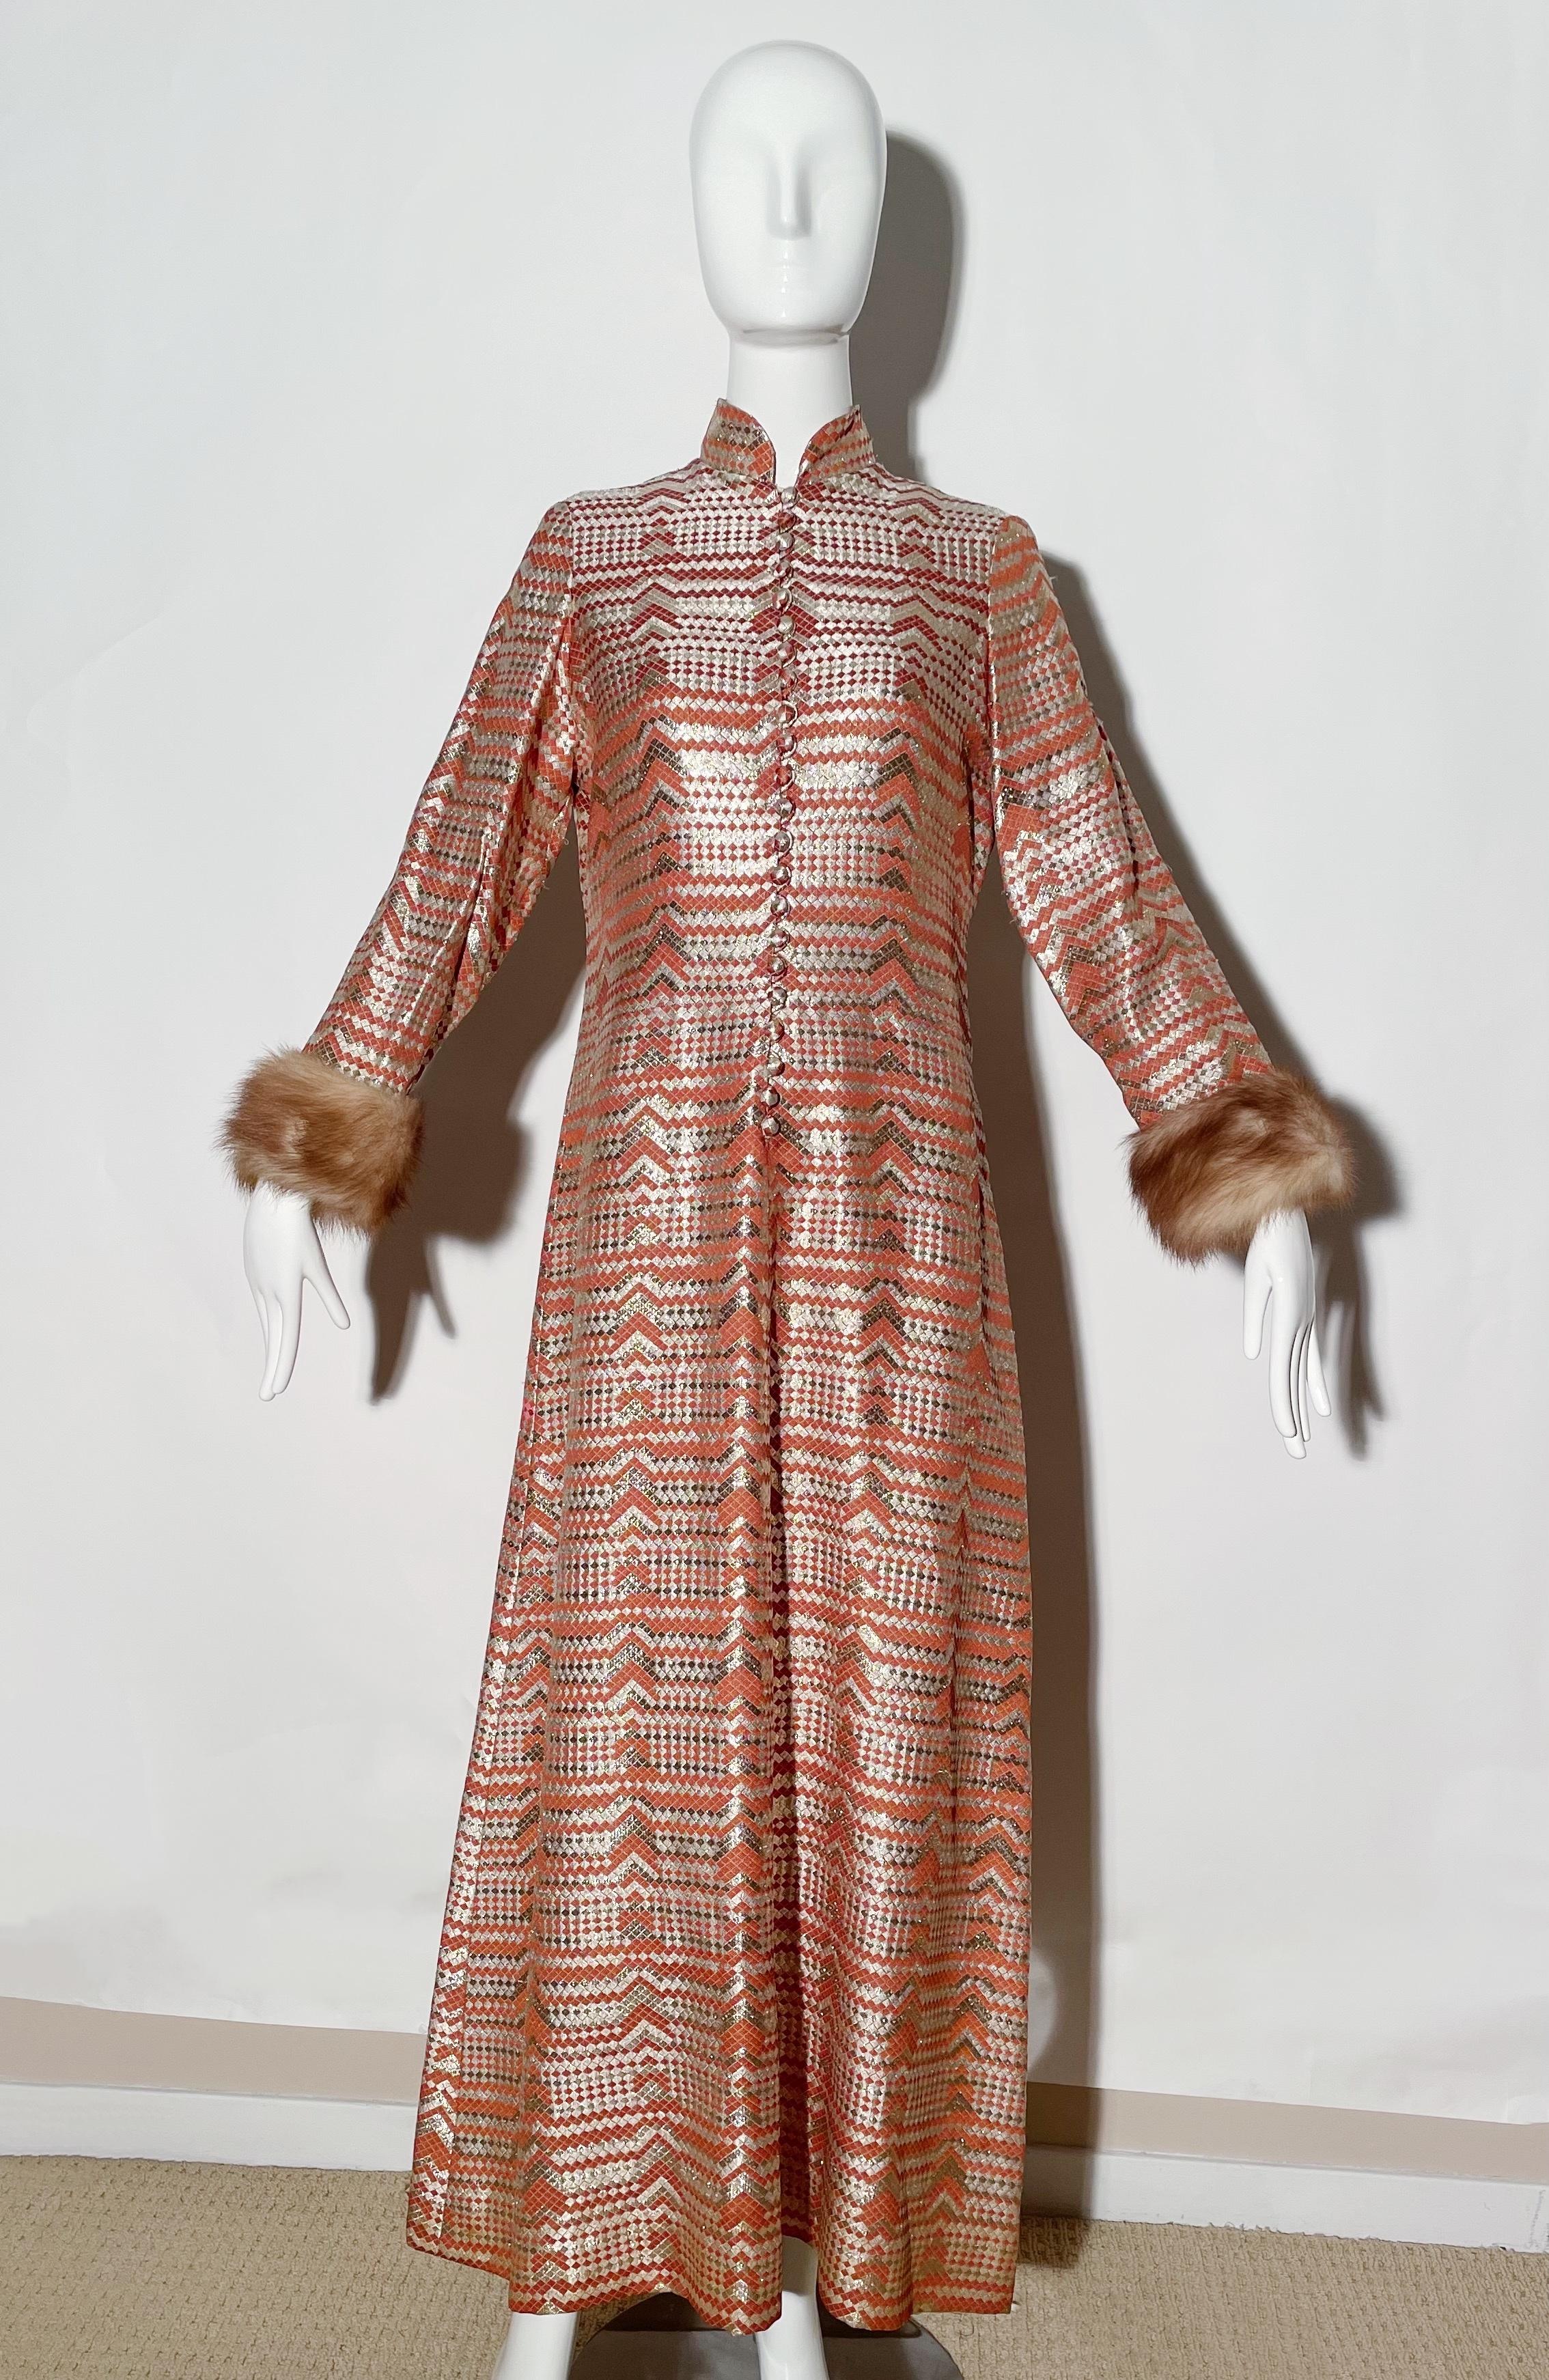 Burnt orange and metallic gown. Fur trim sleeves. Mandarin collar. Front buttons. Rear zipper closure. Lined. 
*Condition: excellent vintage condition. No visible flaws.

Measurements Taken Laying Flat (inches)—
Shoulder to Shoulder: 15 in.
Bust: 38